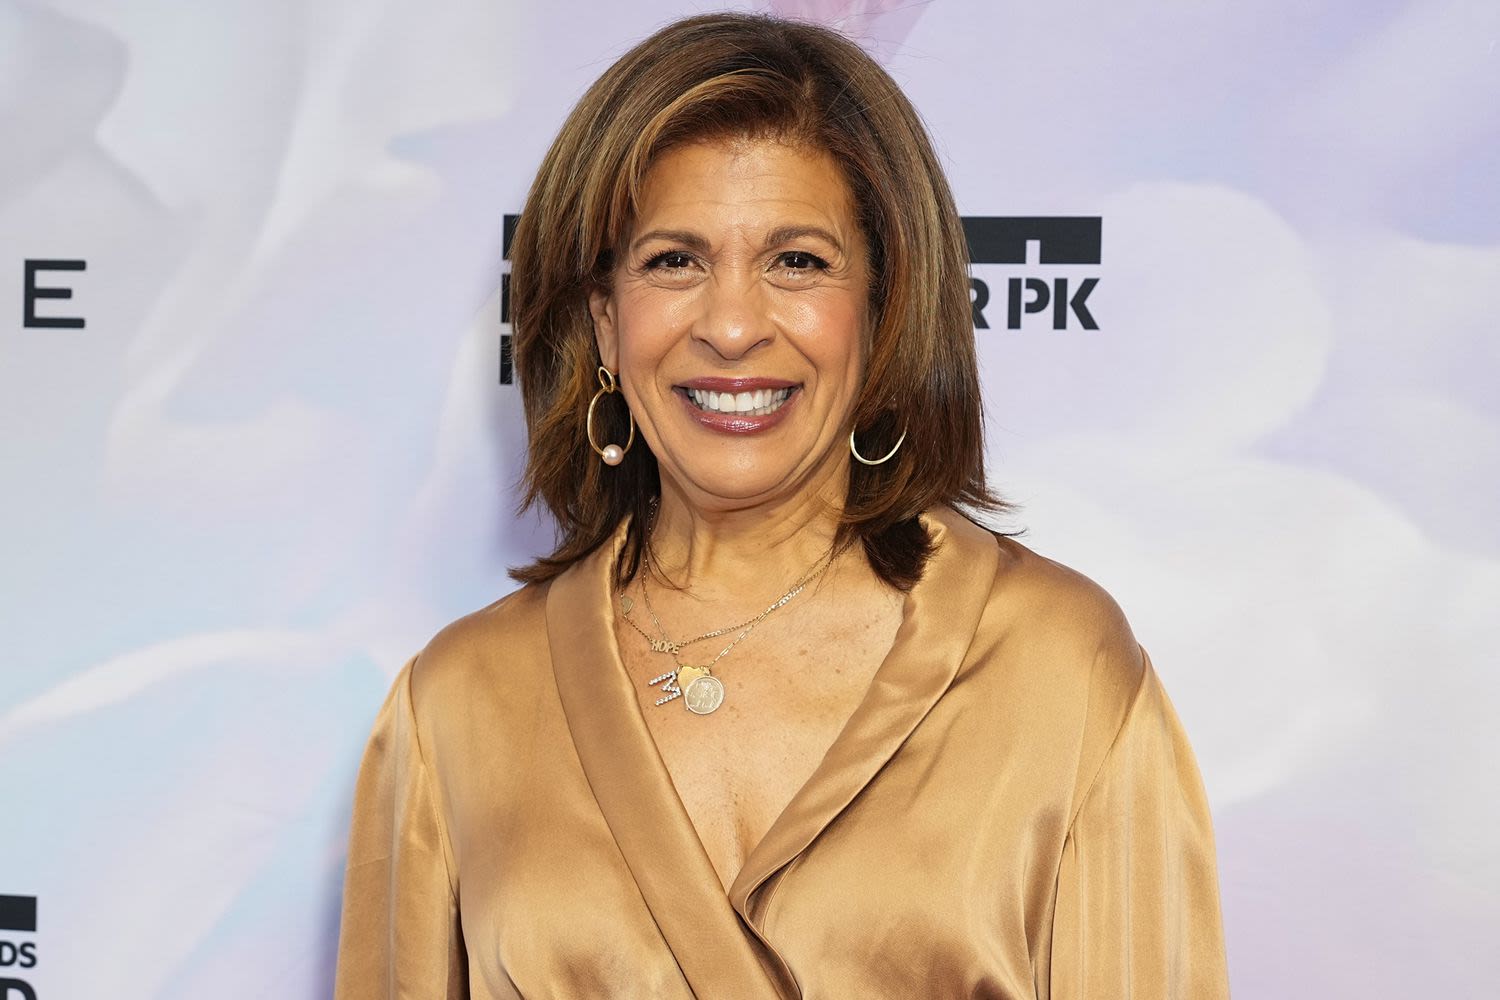 Hoda Kotb Says She’s Been Slacking at the Gym but 'Today’s the Day' to Get Back on Track